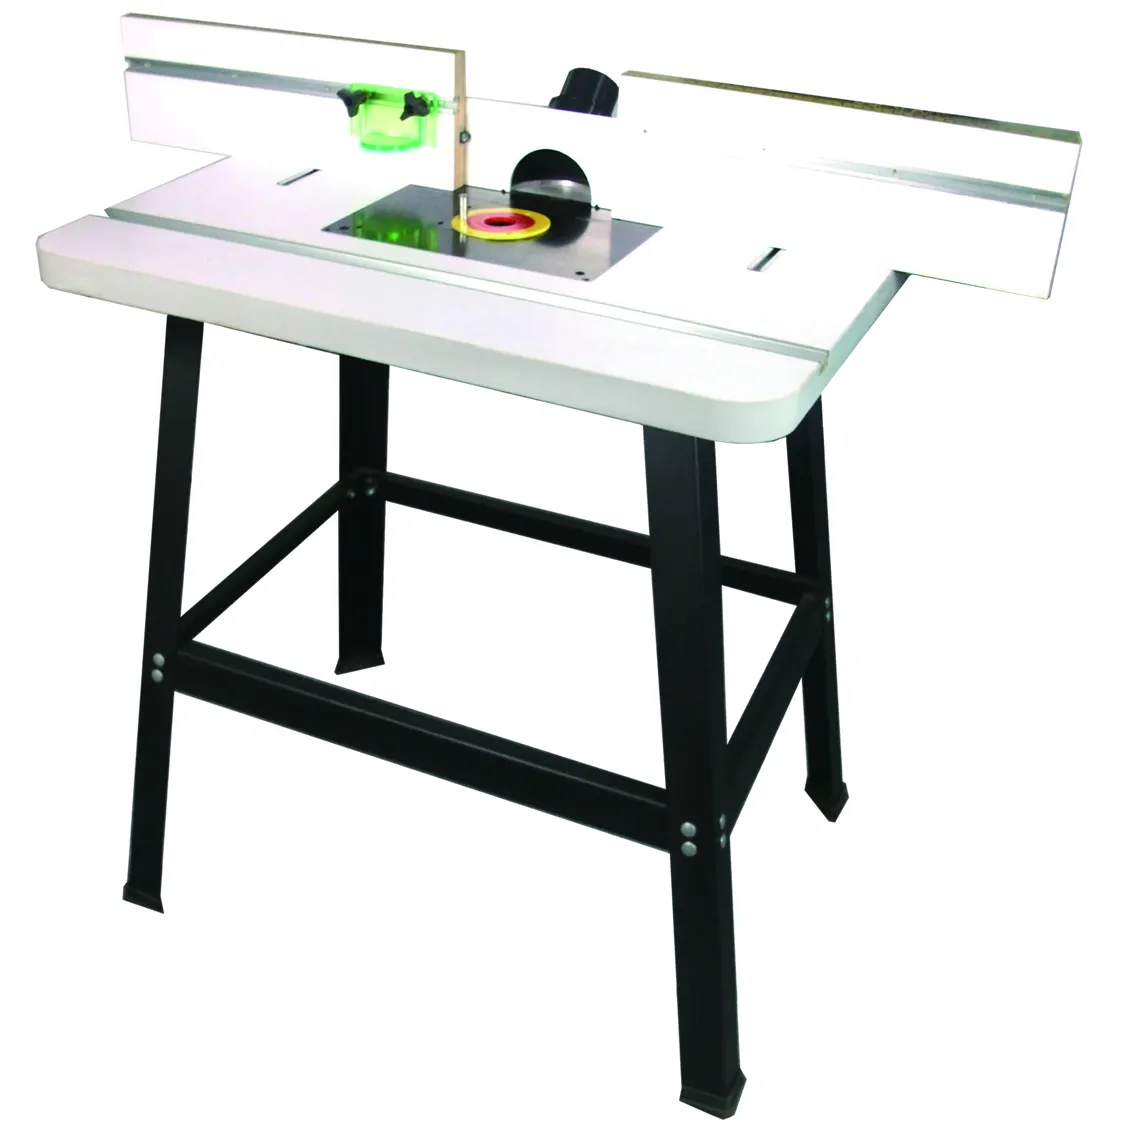 RT016 table router industrial router on sale /cnc router table